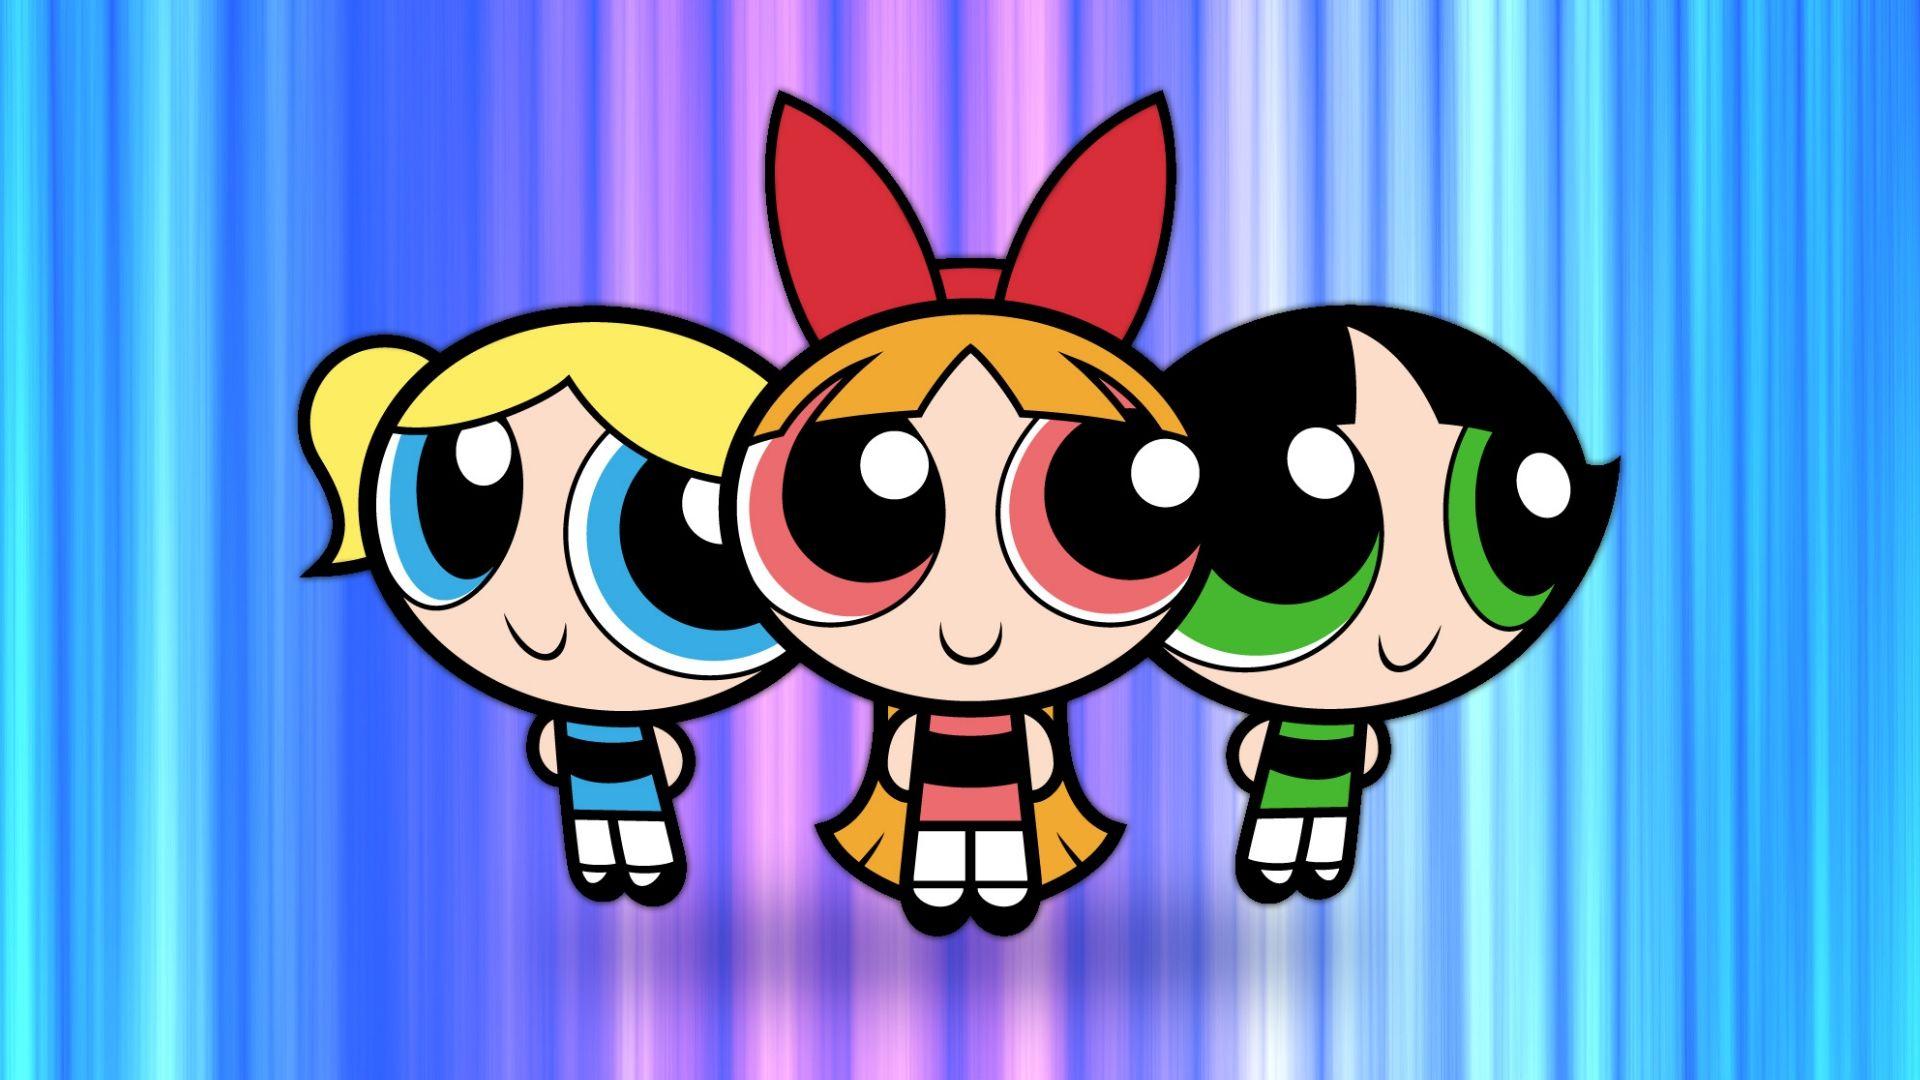 Powerpuff Girls Blossom and Bubbles